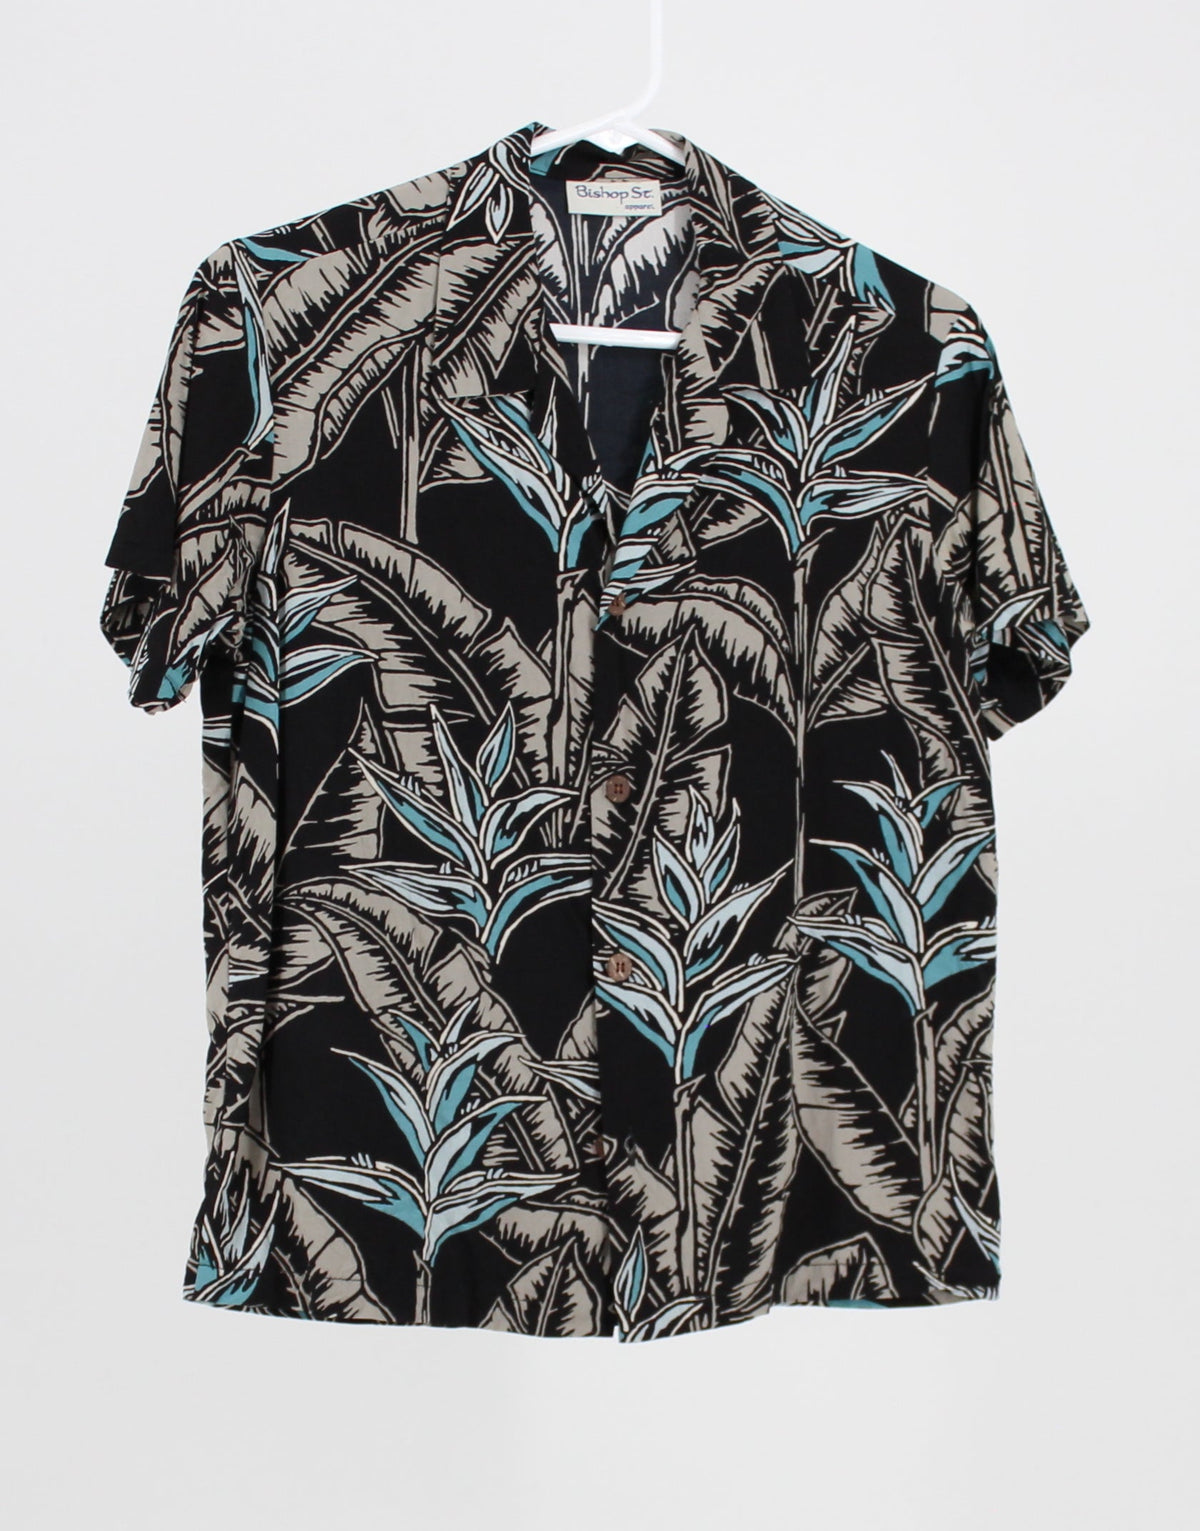 Bishop St. Apparel multi colour palm trees printed short sleeve button up shirt